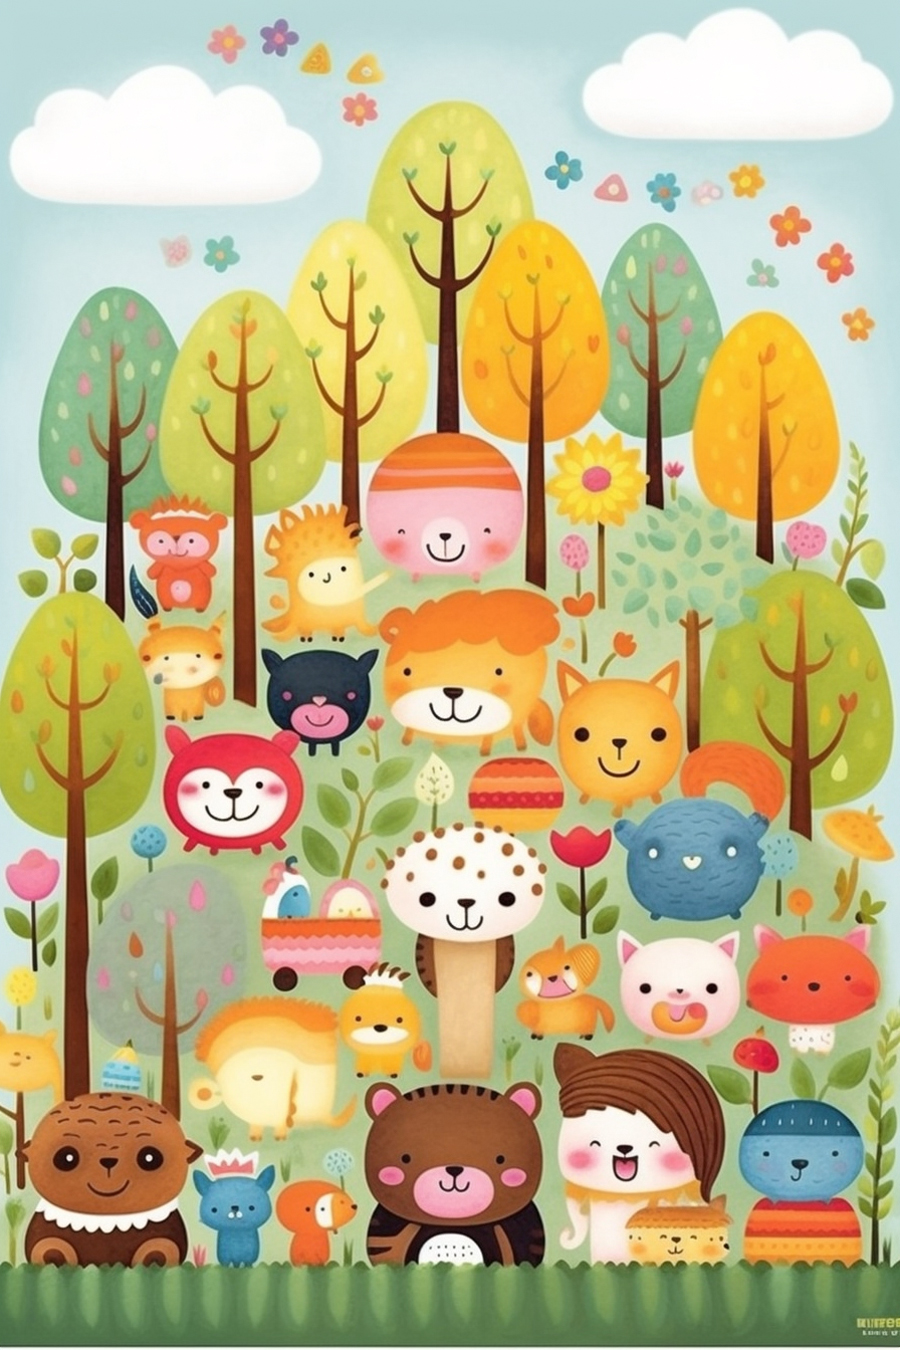 A poster with a group of cartoon animals in the forest.